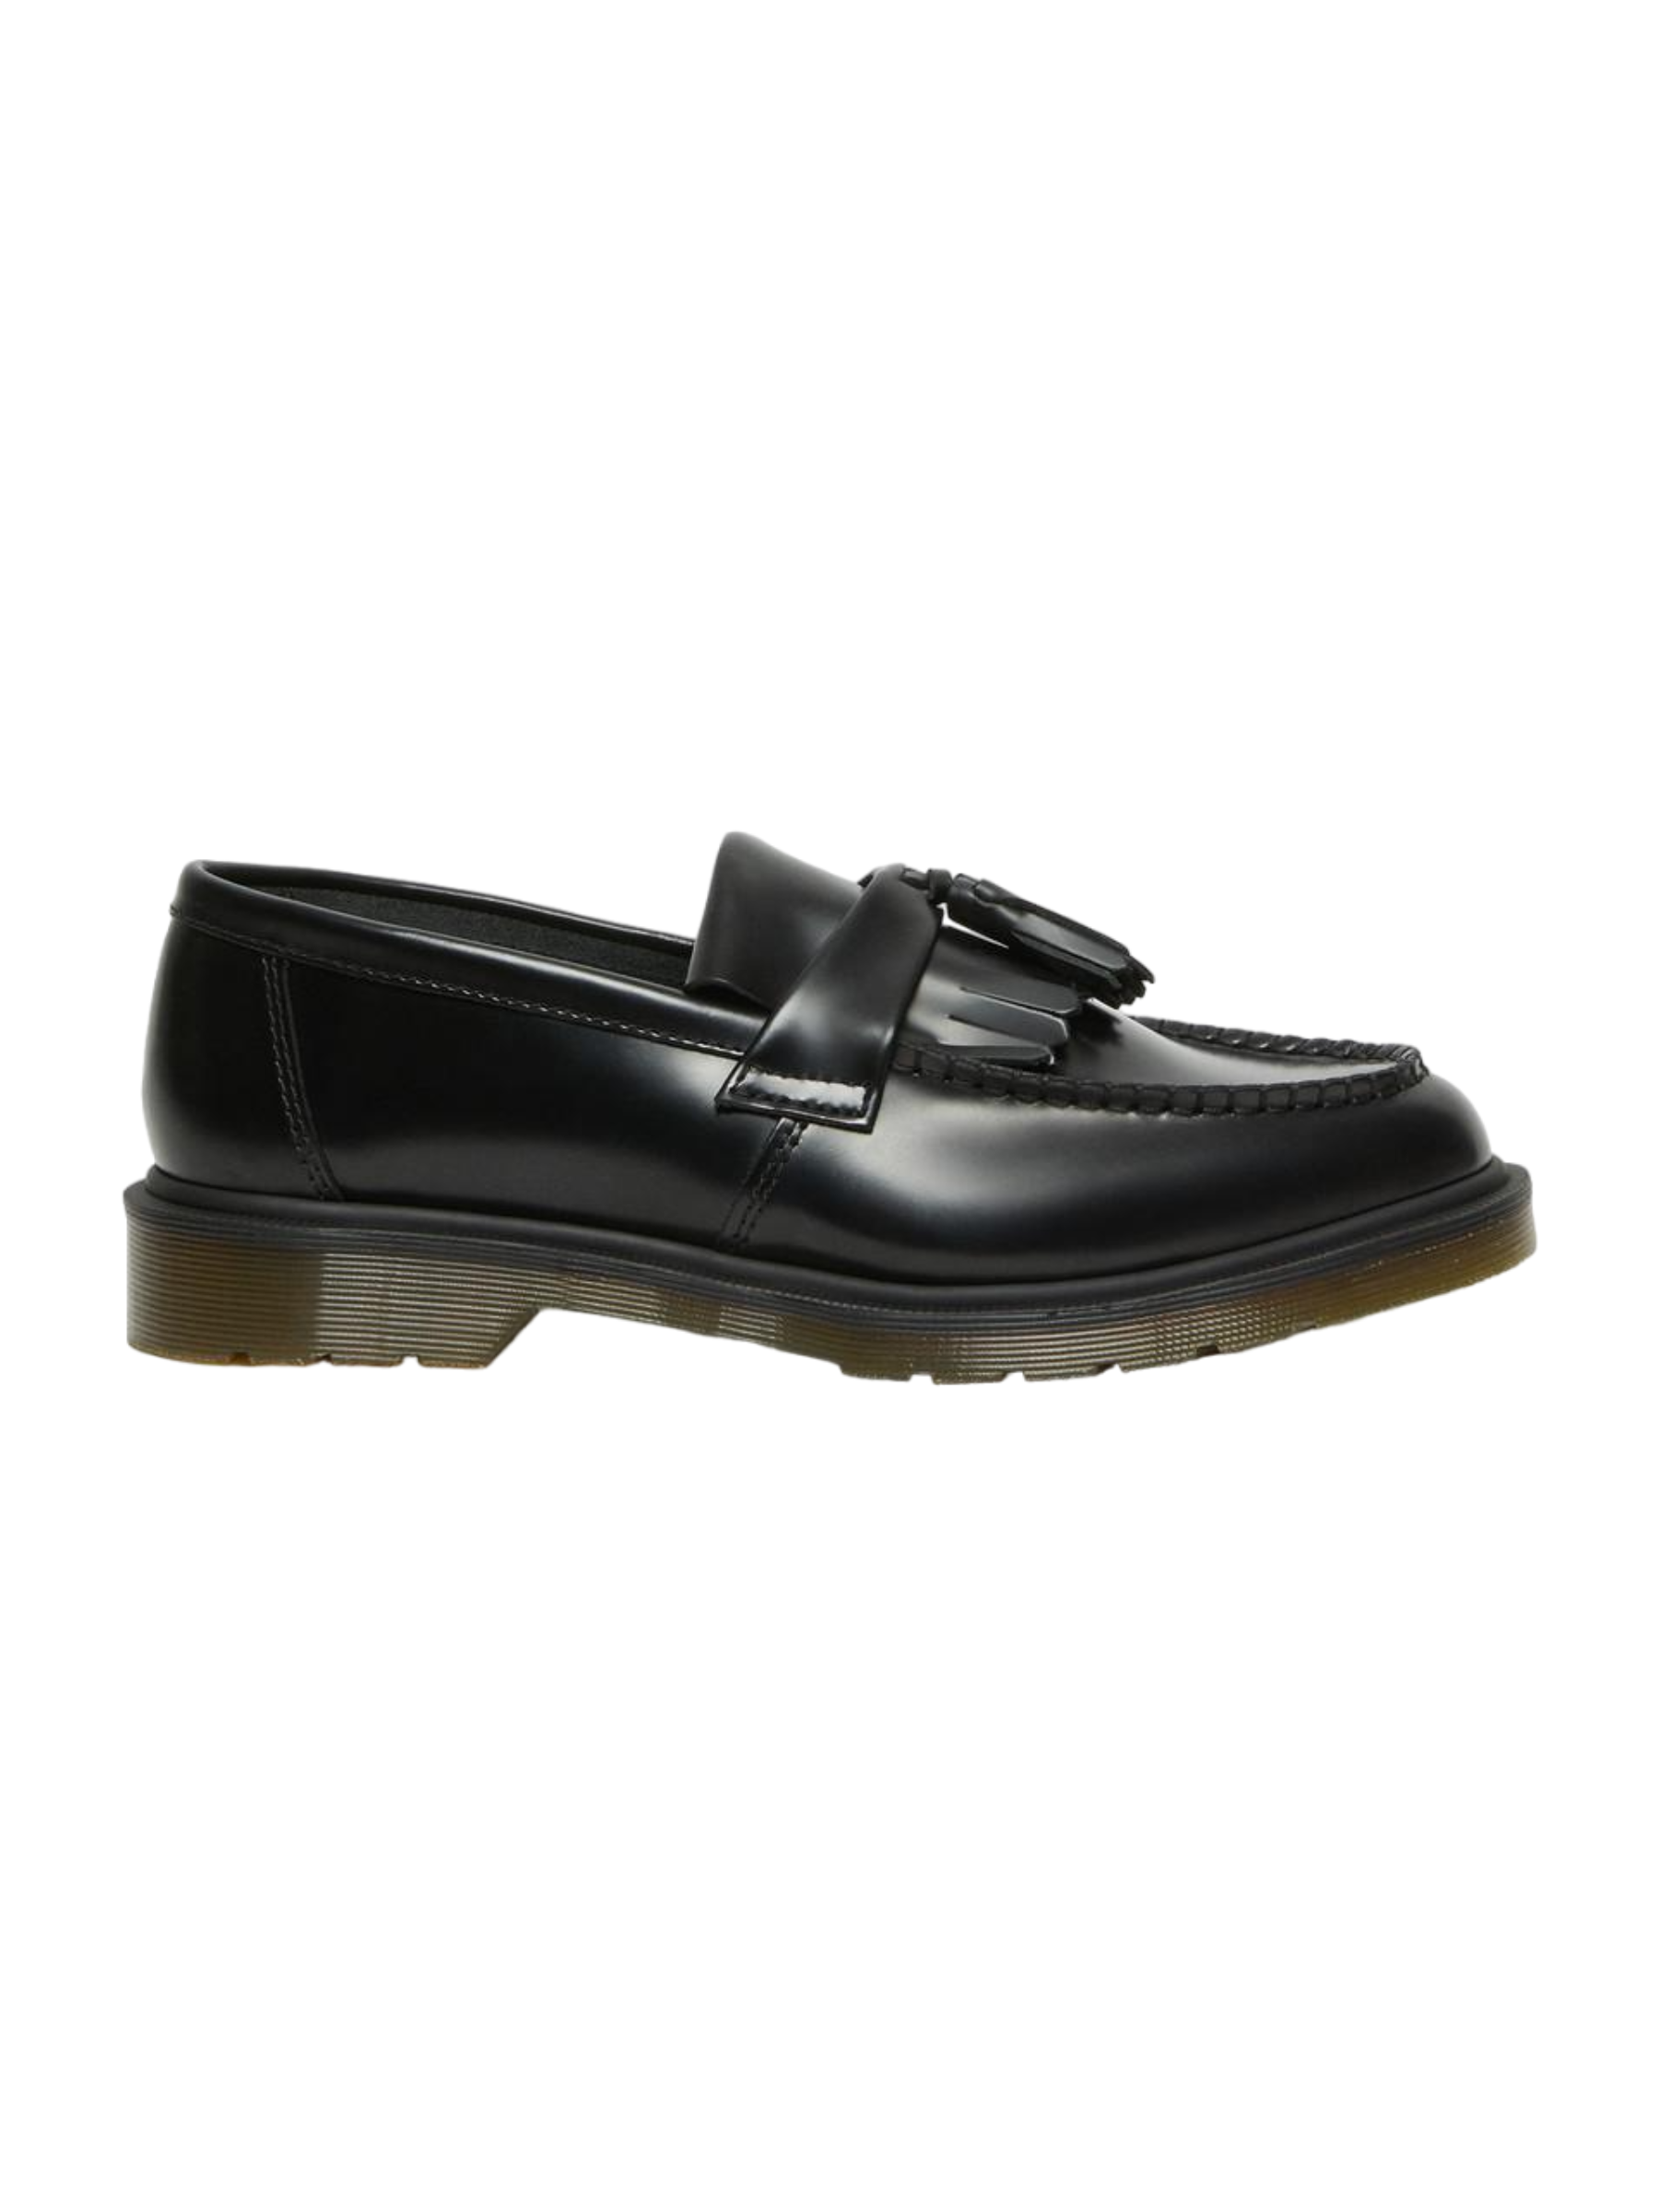 Perfect for their first internship or a more collegiate wardrobe revamp, these slightly chunky loafers are a trendy alternative when they’re ready to give their boots a break. $150, Free People. <a href="https://www.freepeople.com/shop/dr-martens-adrian-loafers/?">Get it now!</a><p>Sign up for today’s biggest stories, from pop culture to politics.</p><a href="https://www.glamour.com/newsletter/news?sourceCode=msnsend">Sign Up</a>